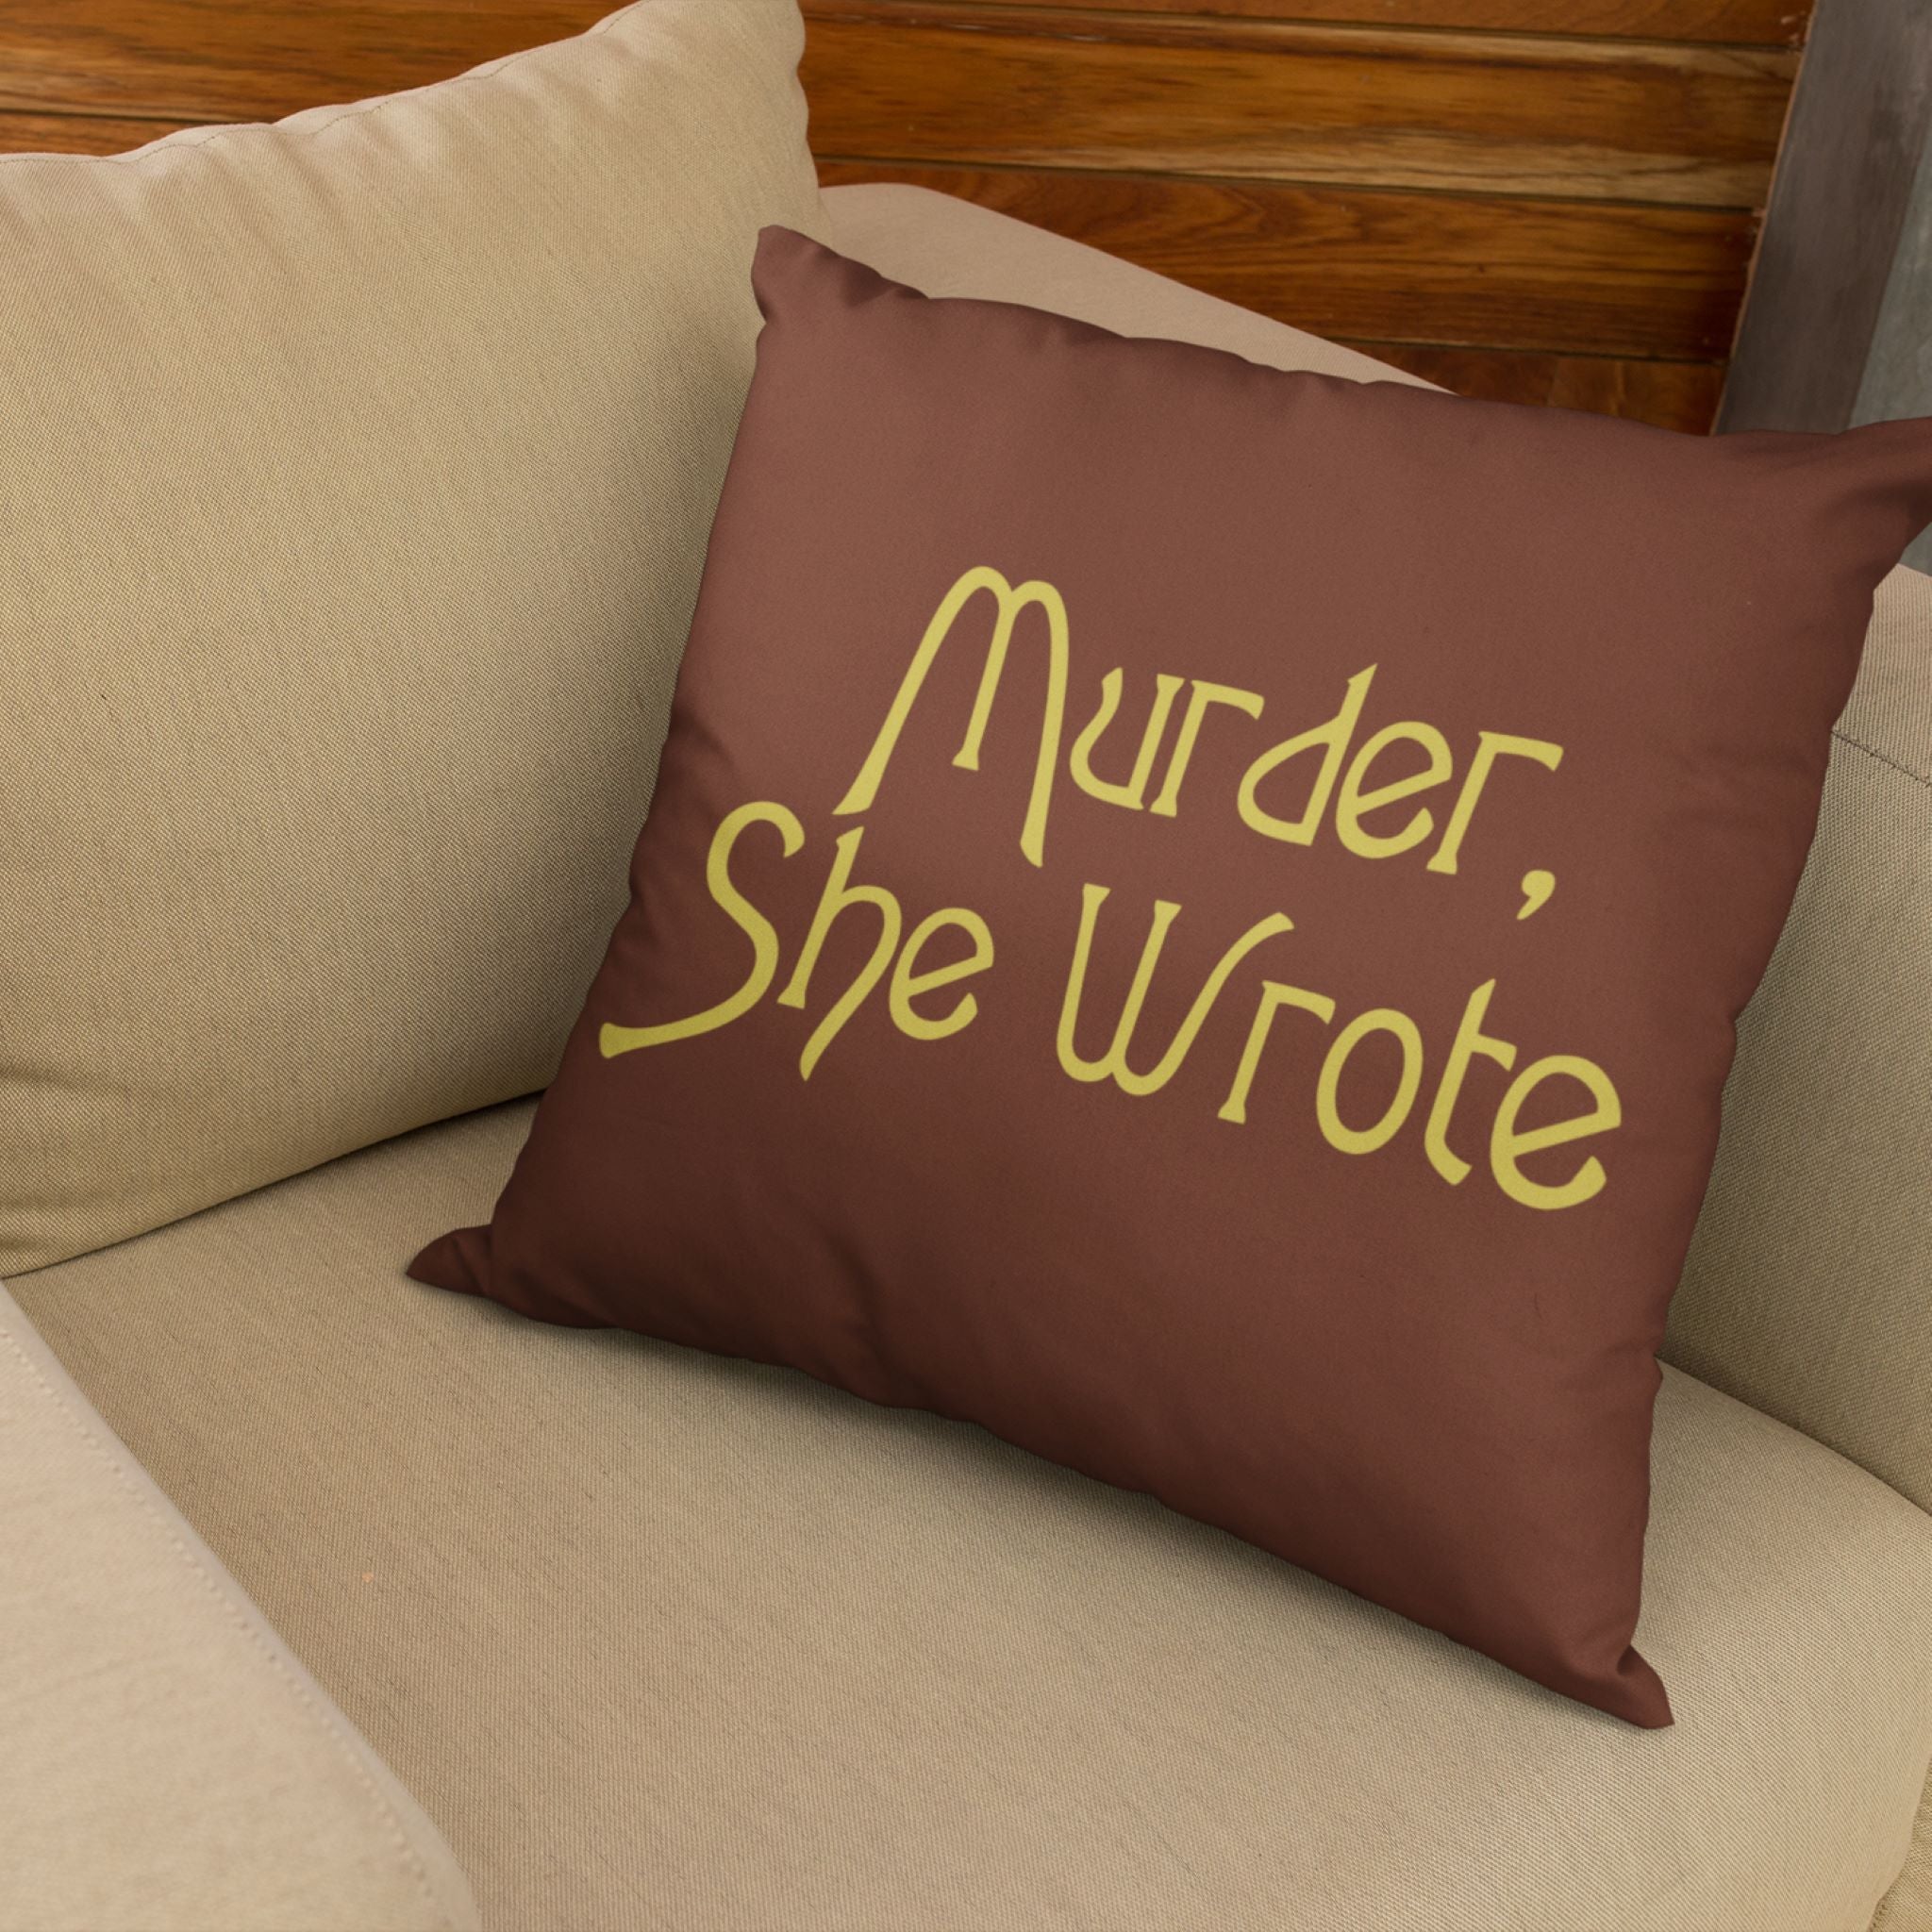 Murder She wrote pillow on couch